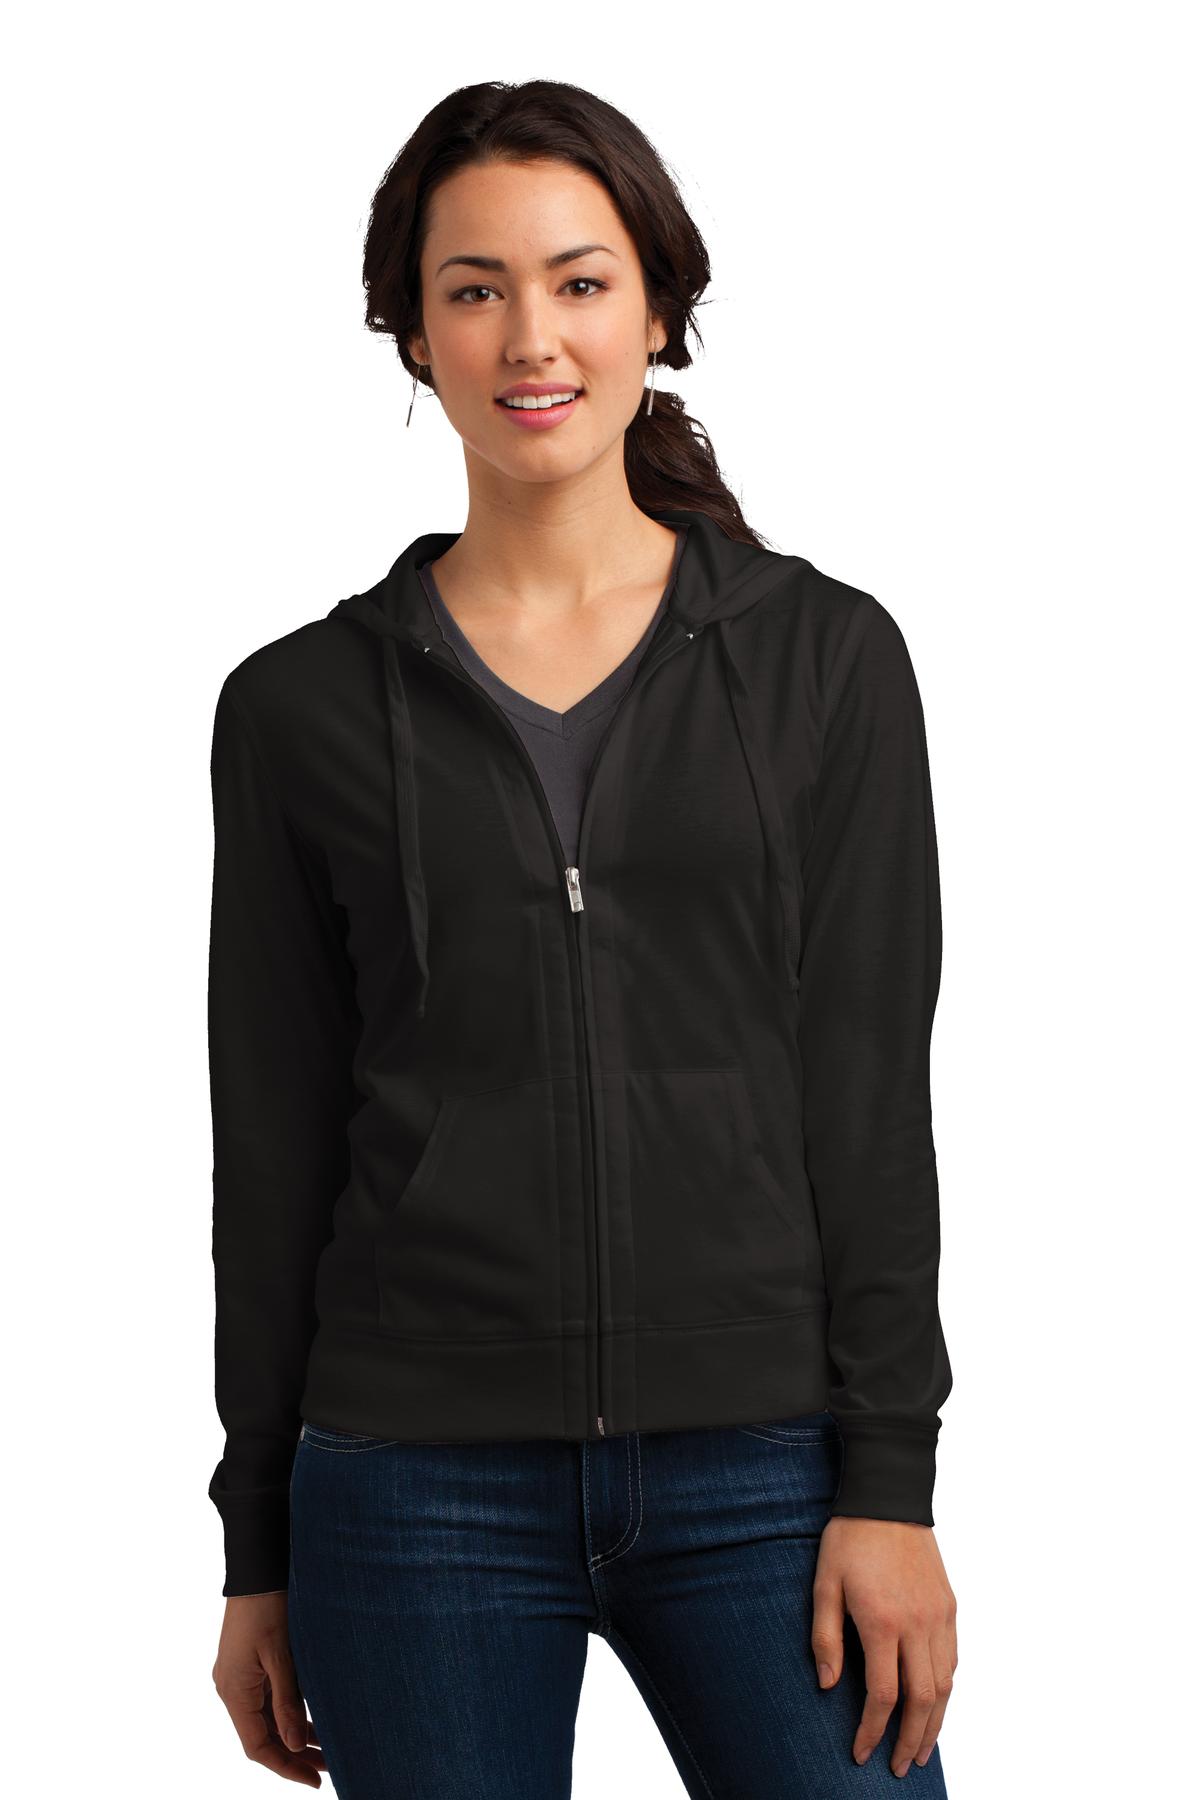 District® Women's Fitted Jersey Full-Zip Hoodie. DT2100 - DFW Impression